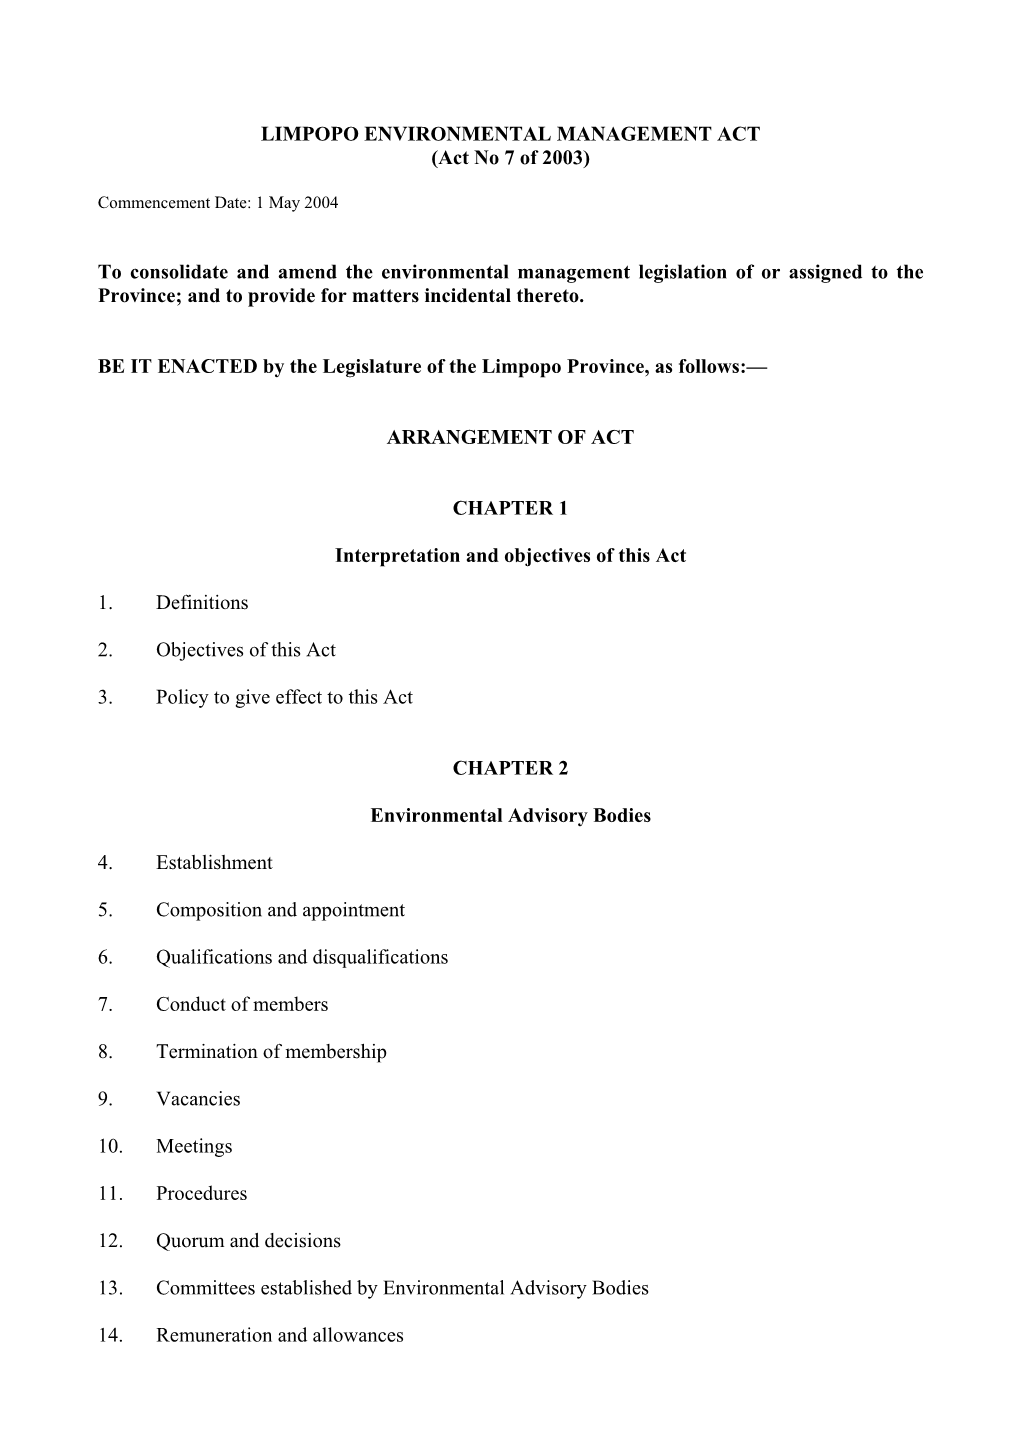 LIMPOPO ENVIRONMENTAL MANAGEMENT ACT (Act No 7 of 2003)